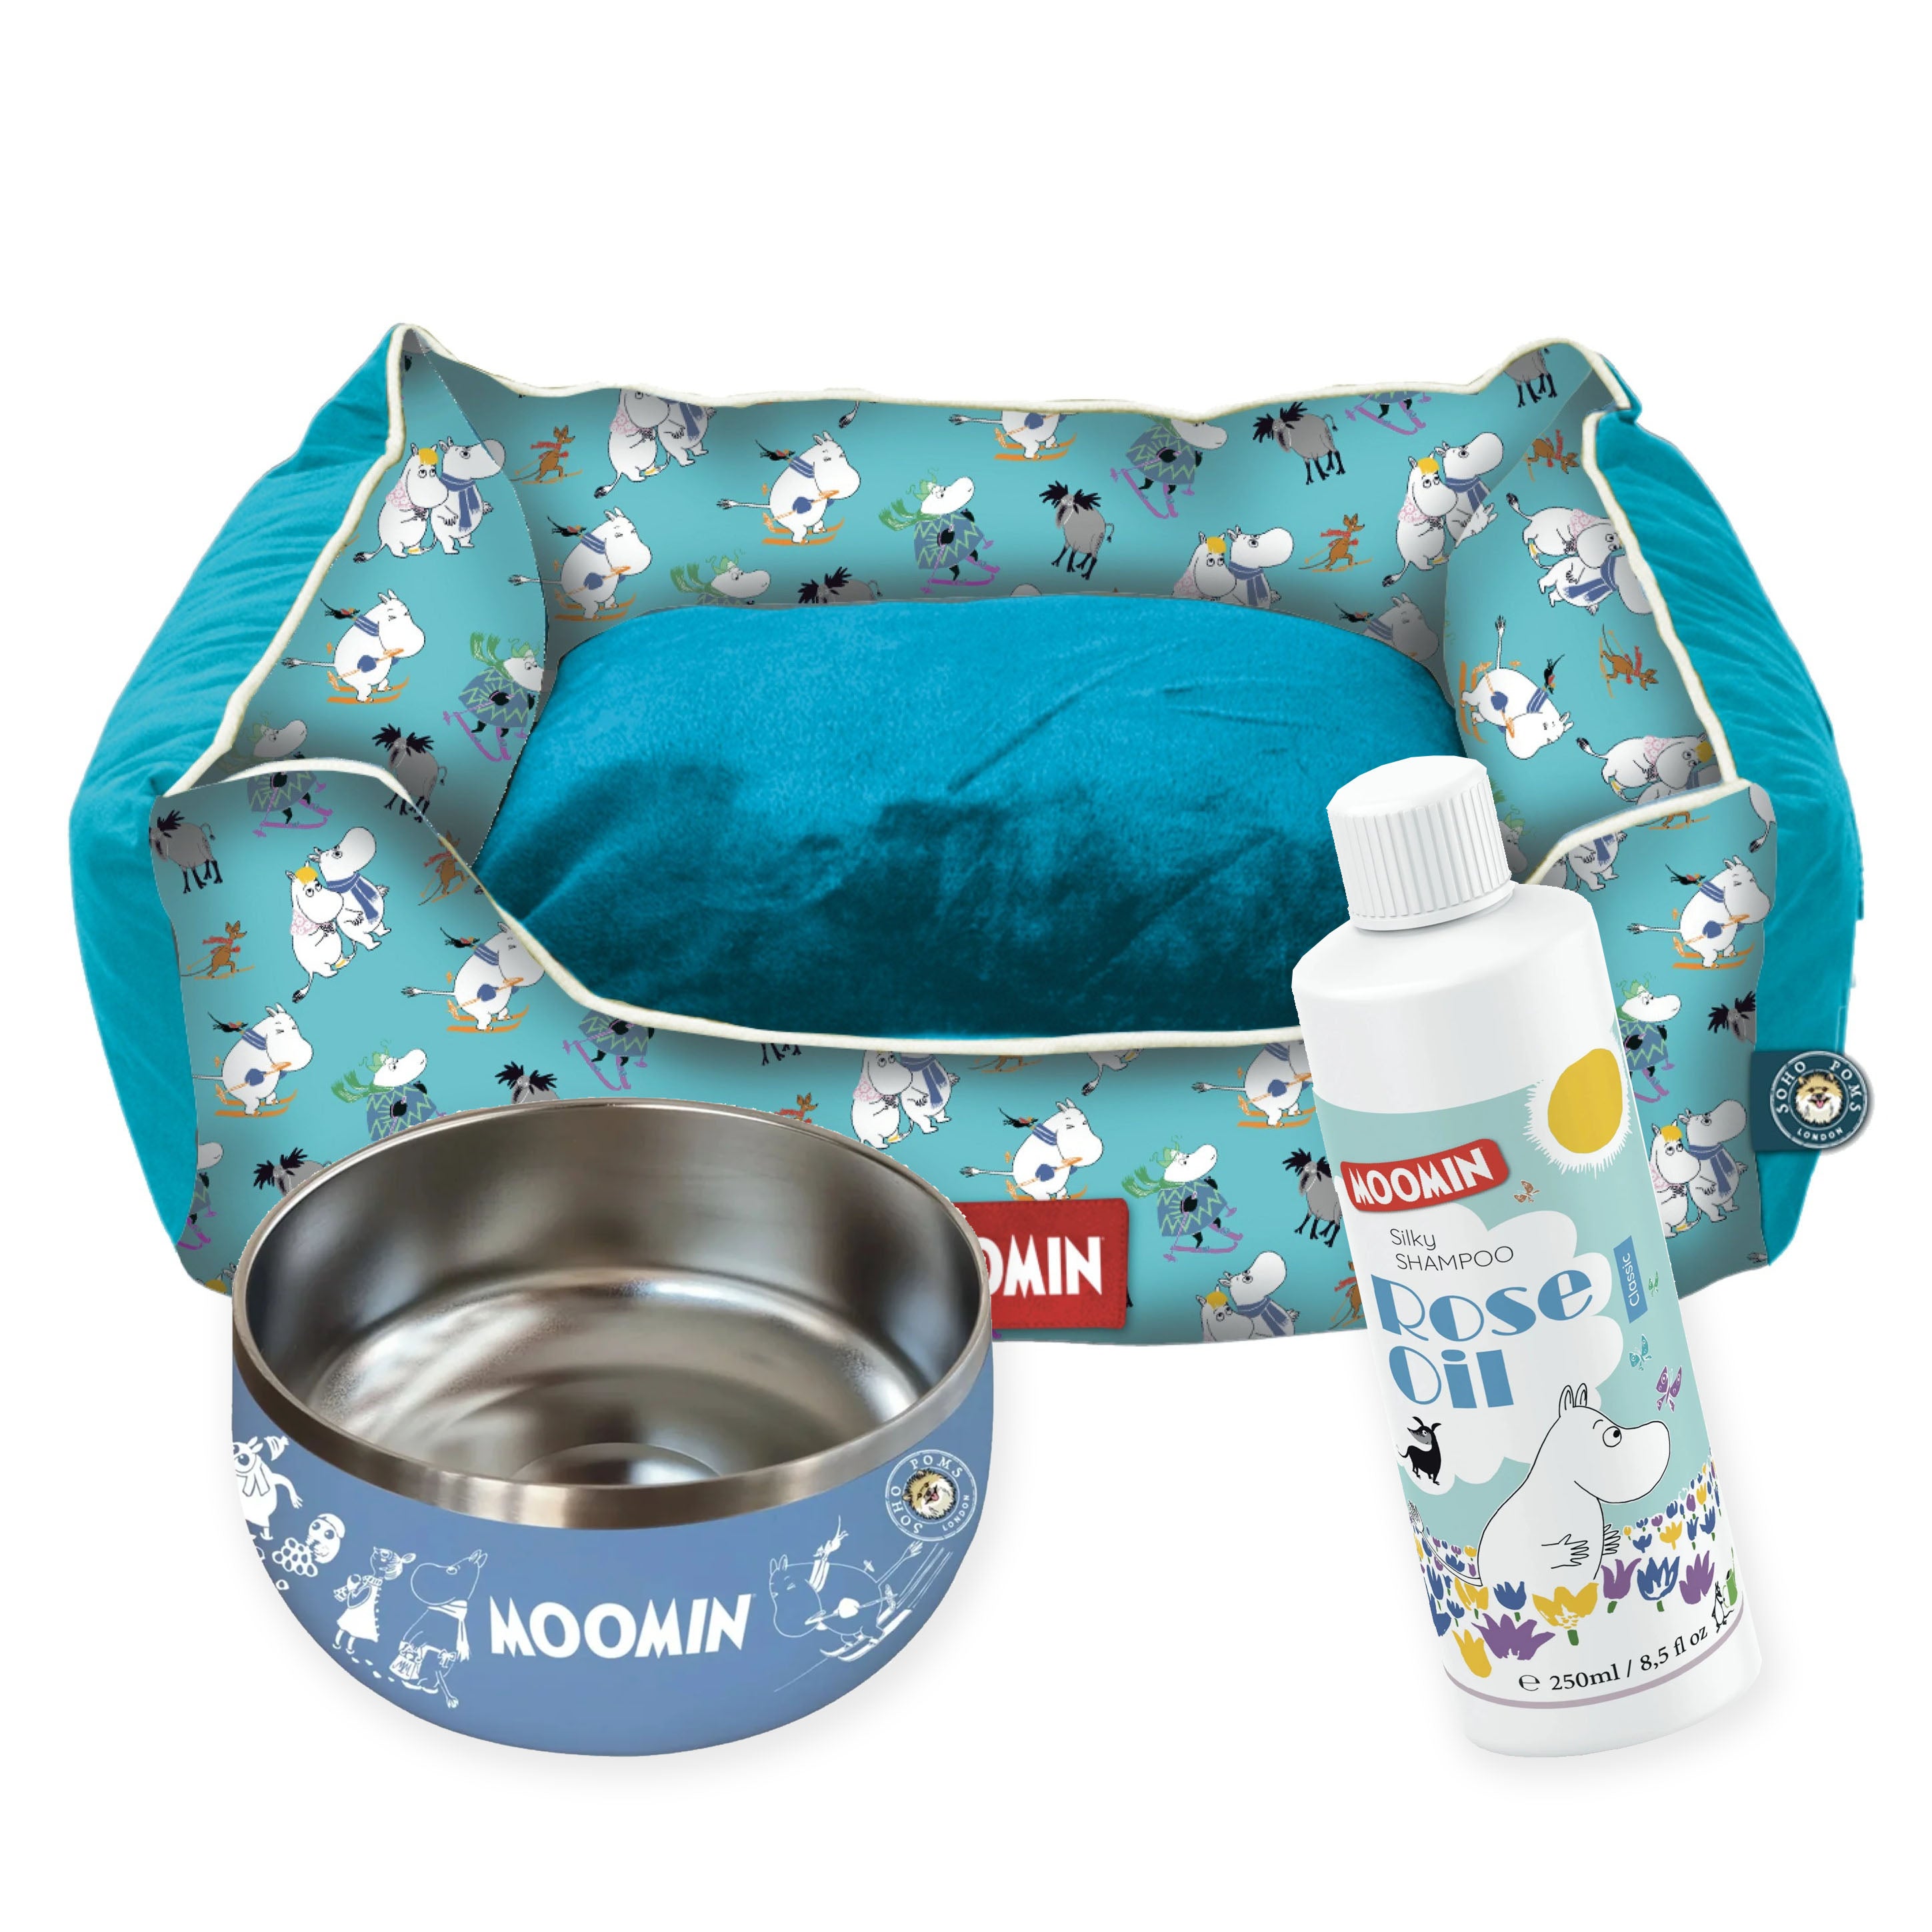 Moomins Bed, Bowl & Shampoo Package by SohoPoms